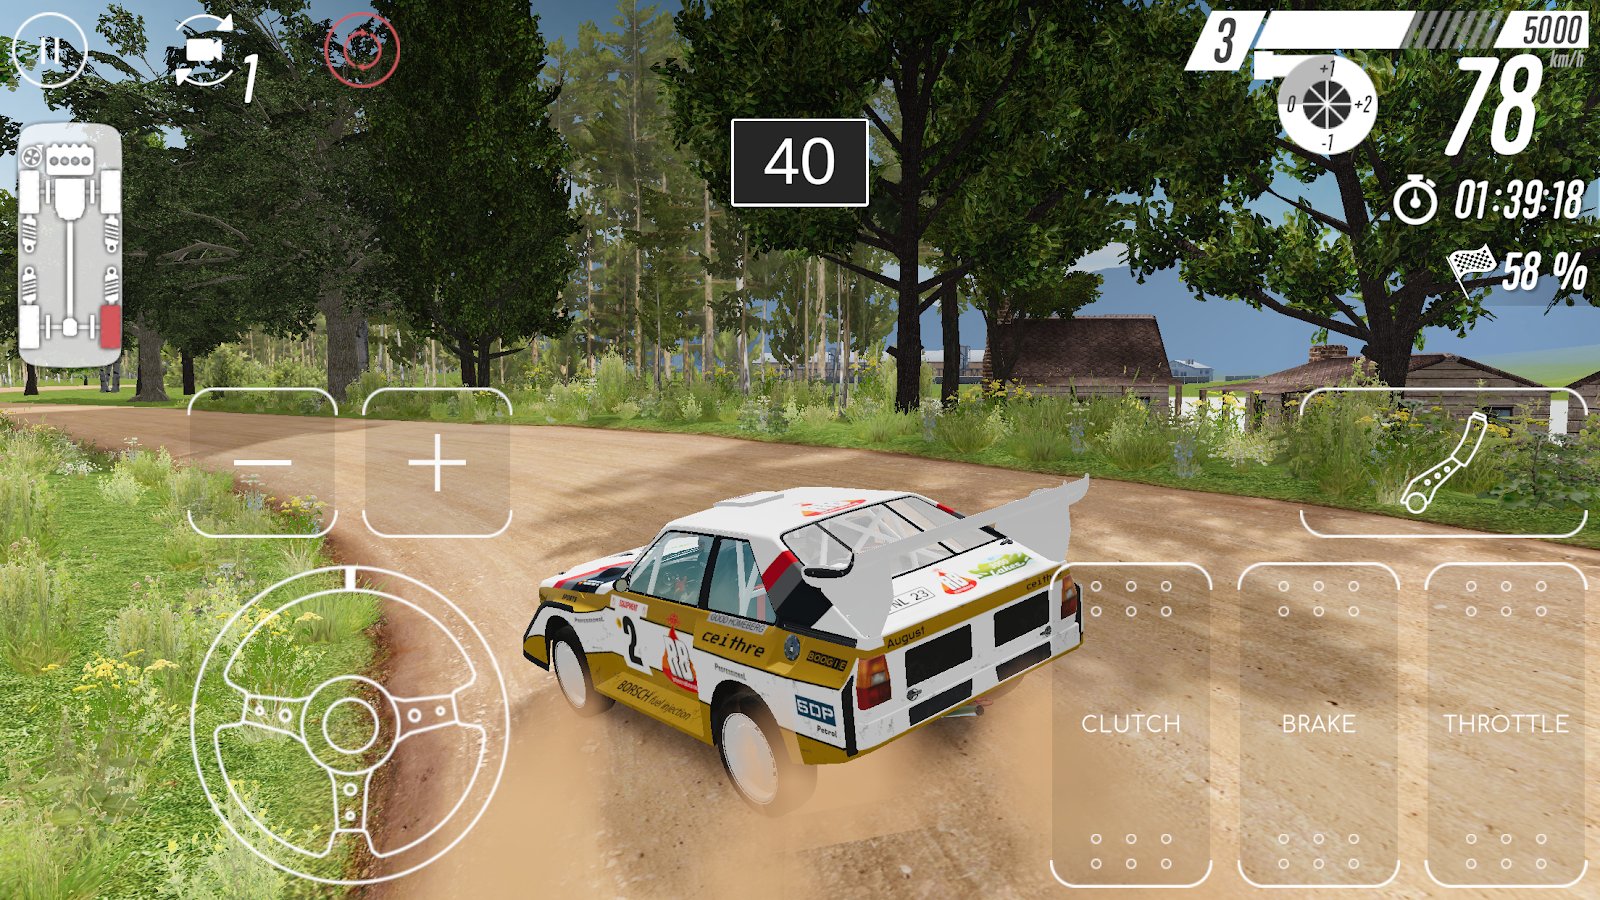 CarX Rally download 25100 Unlocked (Mod: unlimited money) APK for Android